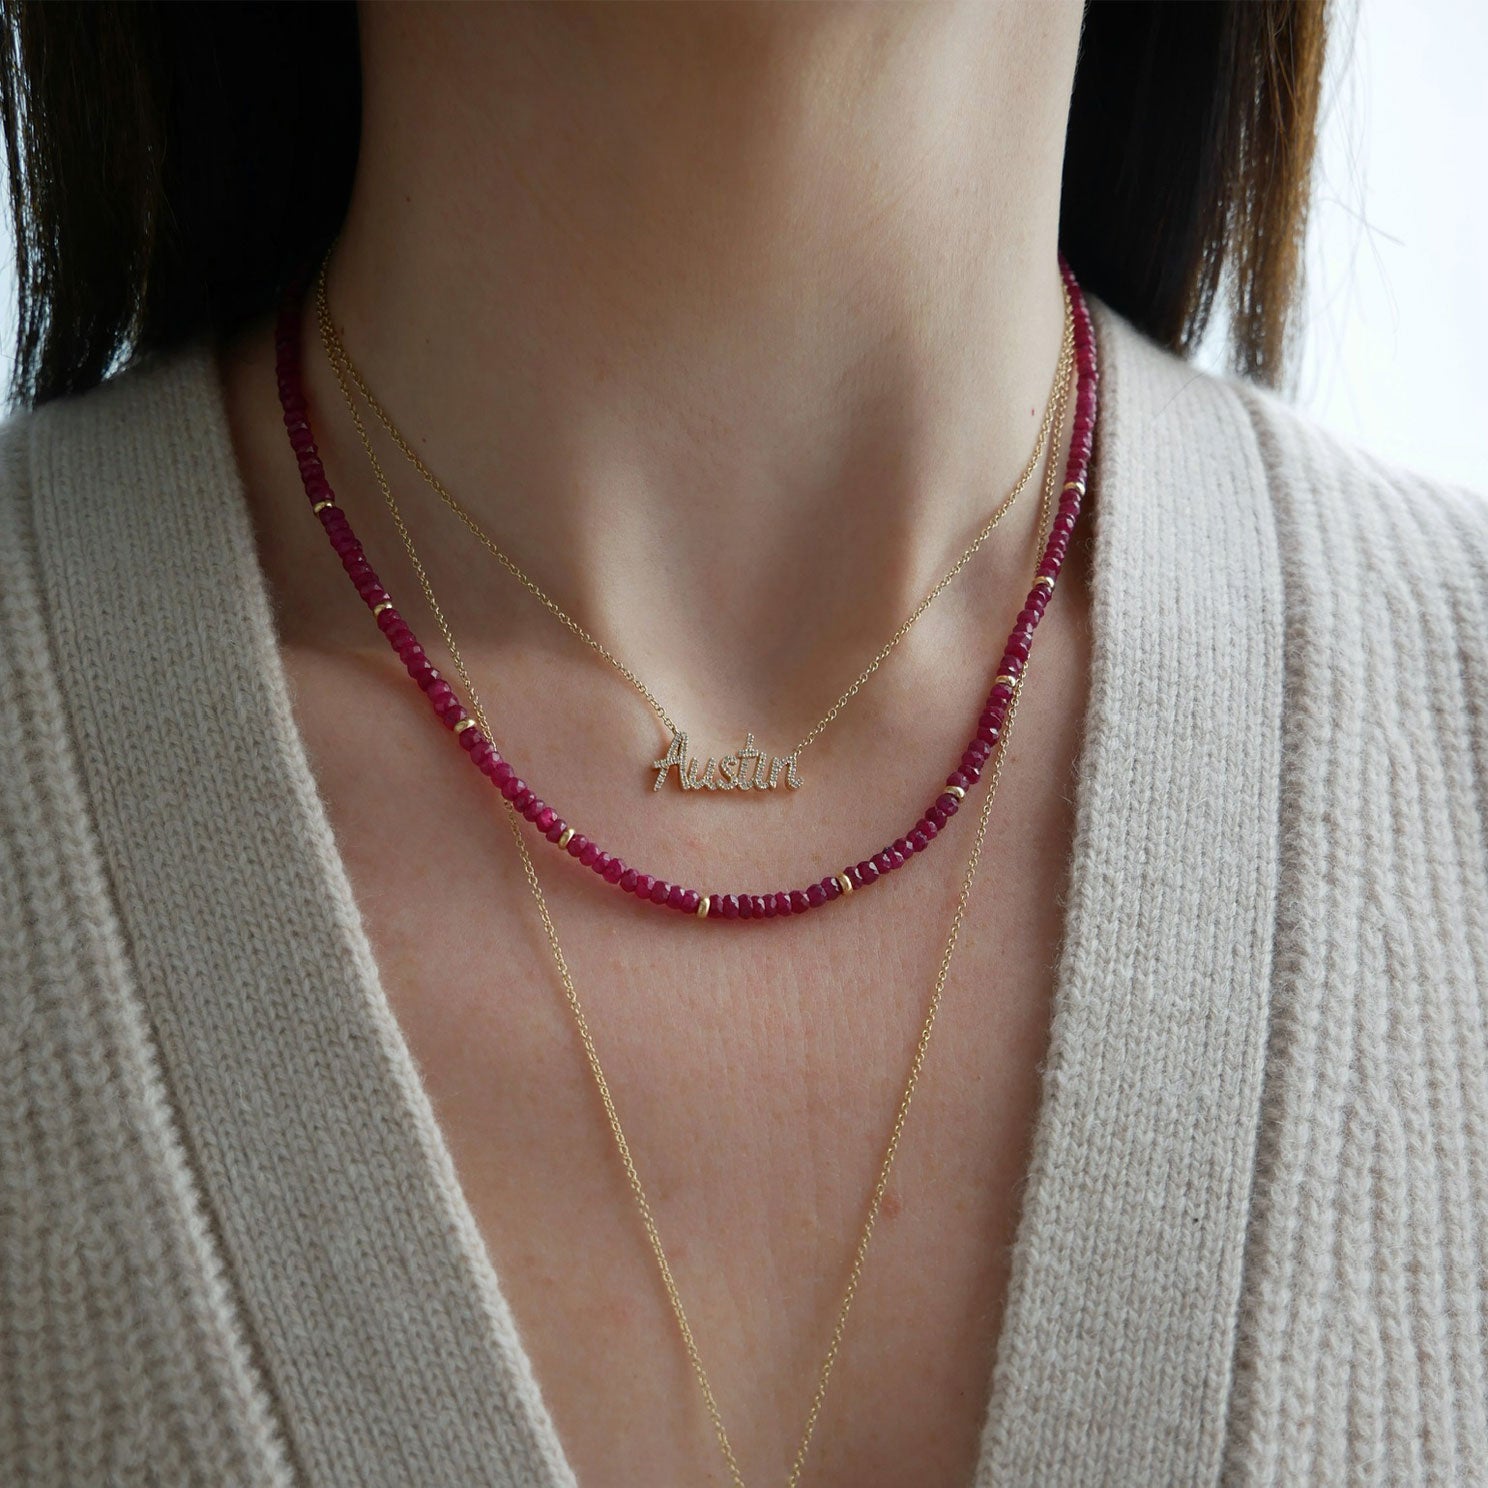 Birthstone Bead Necklace In Ruby styled on neck of model wearing gold and diamond custom script necklace in Austin and wearing tan sweater